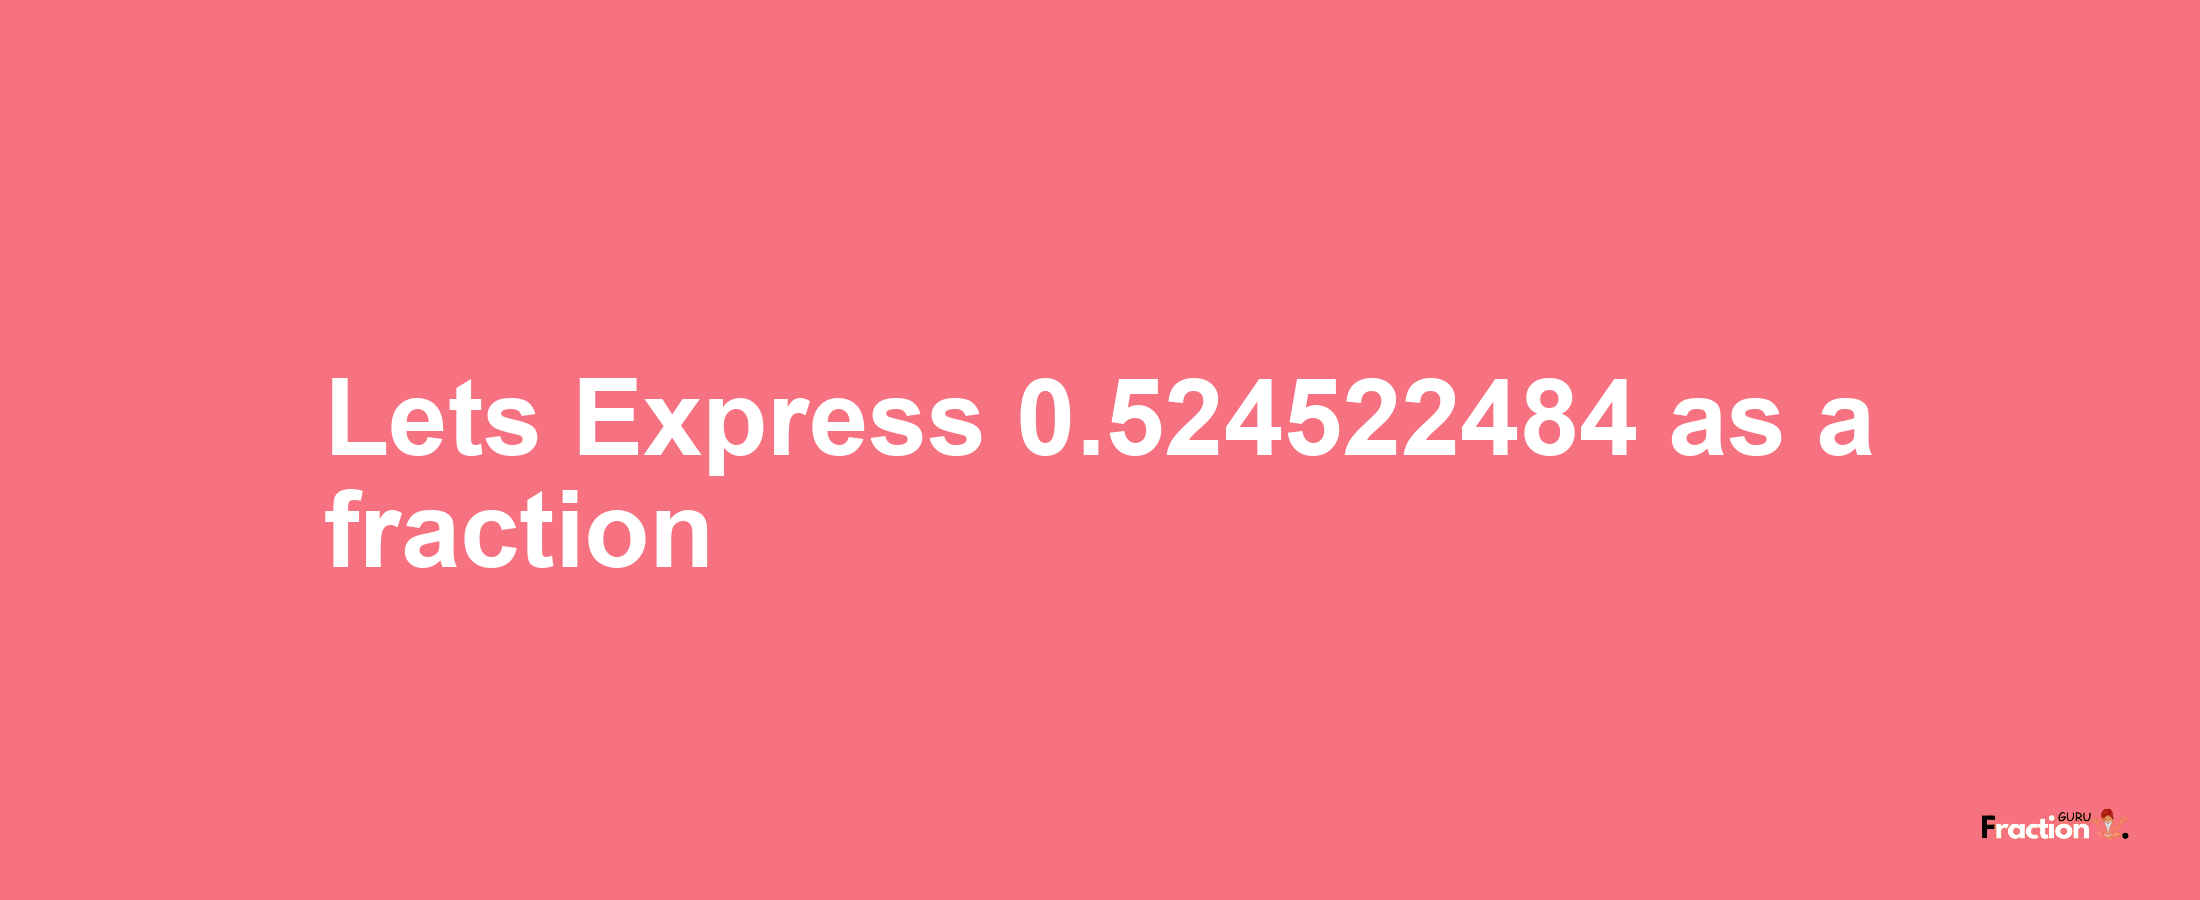 Lets Express 0.524522484 as afraction